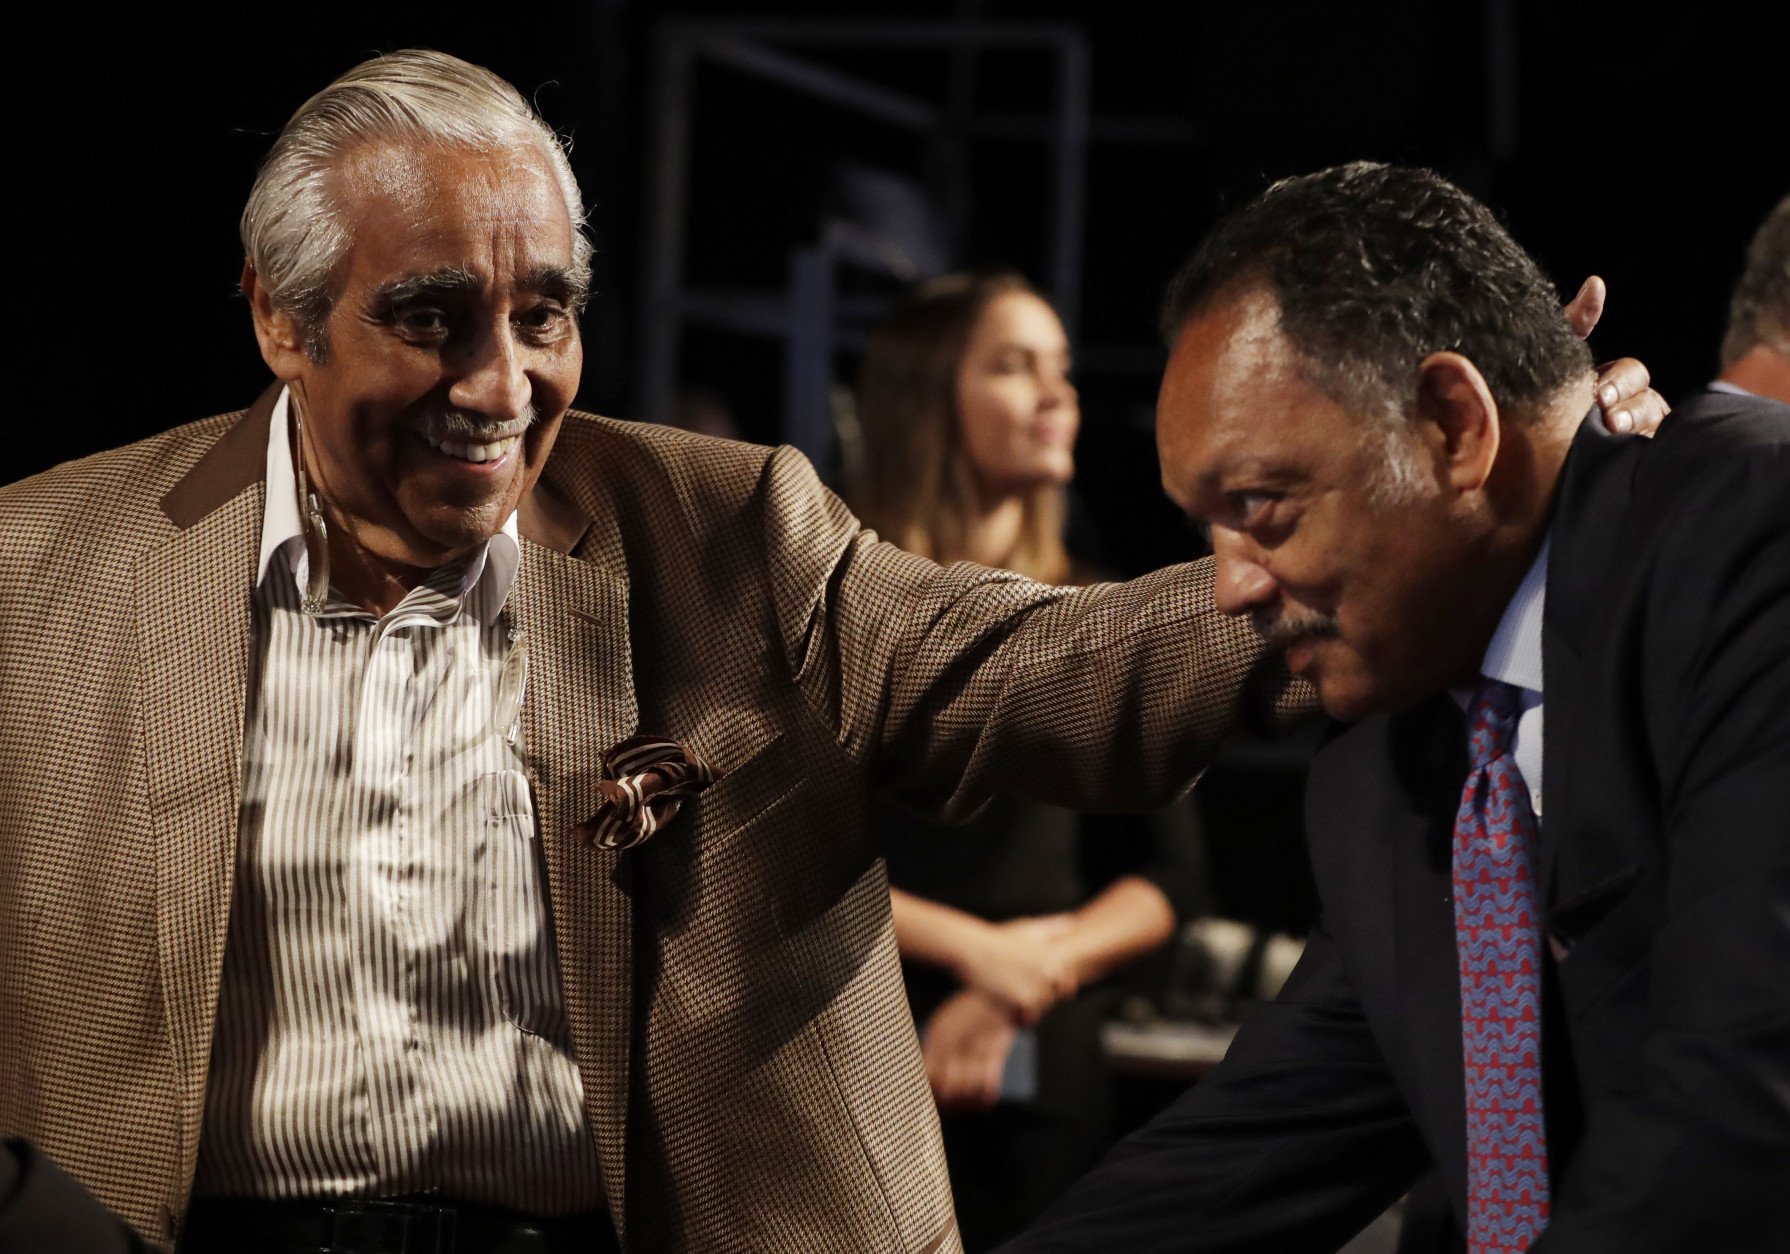 Rep. Charlie Rangel, D-NY, speaks to Jesse Jackson, right, before the presidential debate between Democratic presidential nominee Hillary Clinton and Republican presidential nominee Donald Trump at Hofstra University in Hempstead, N.Y., Monday, Sept. 26, 2016. (AP Photo/Julio Cortez)